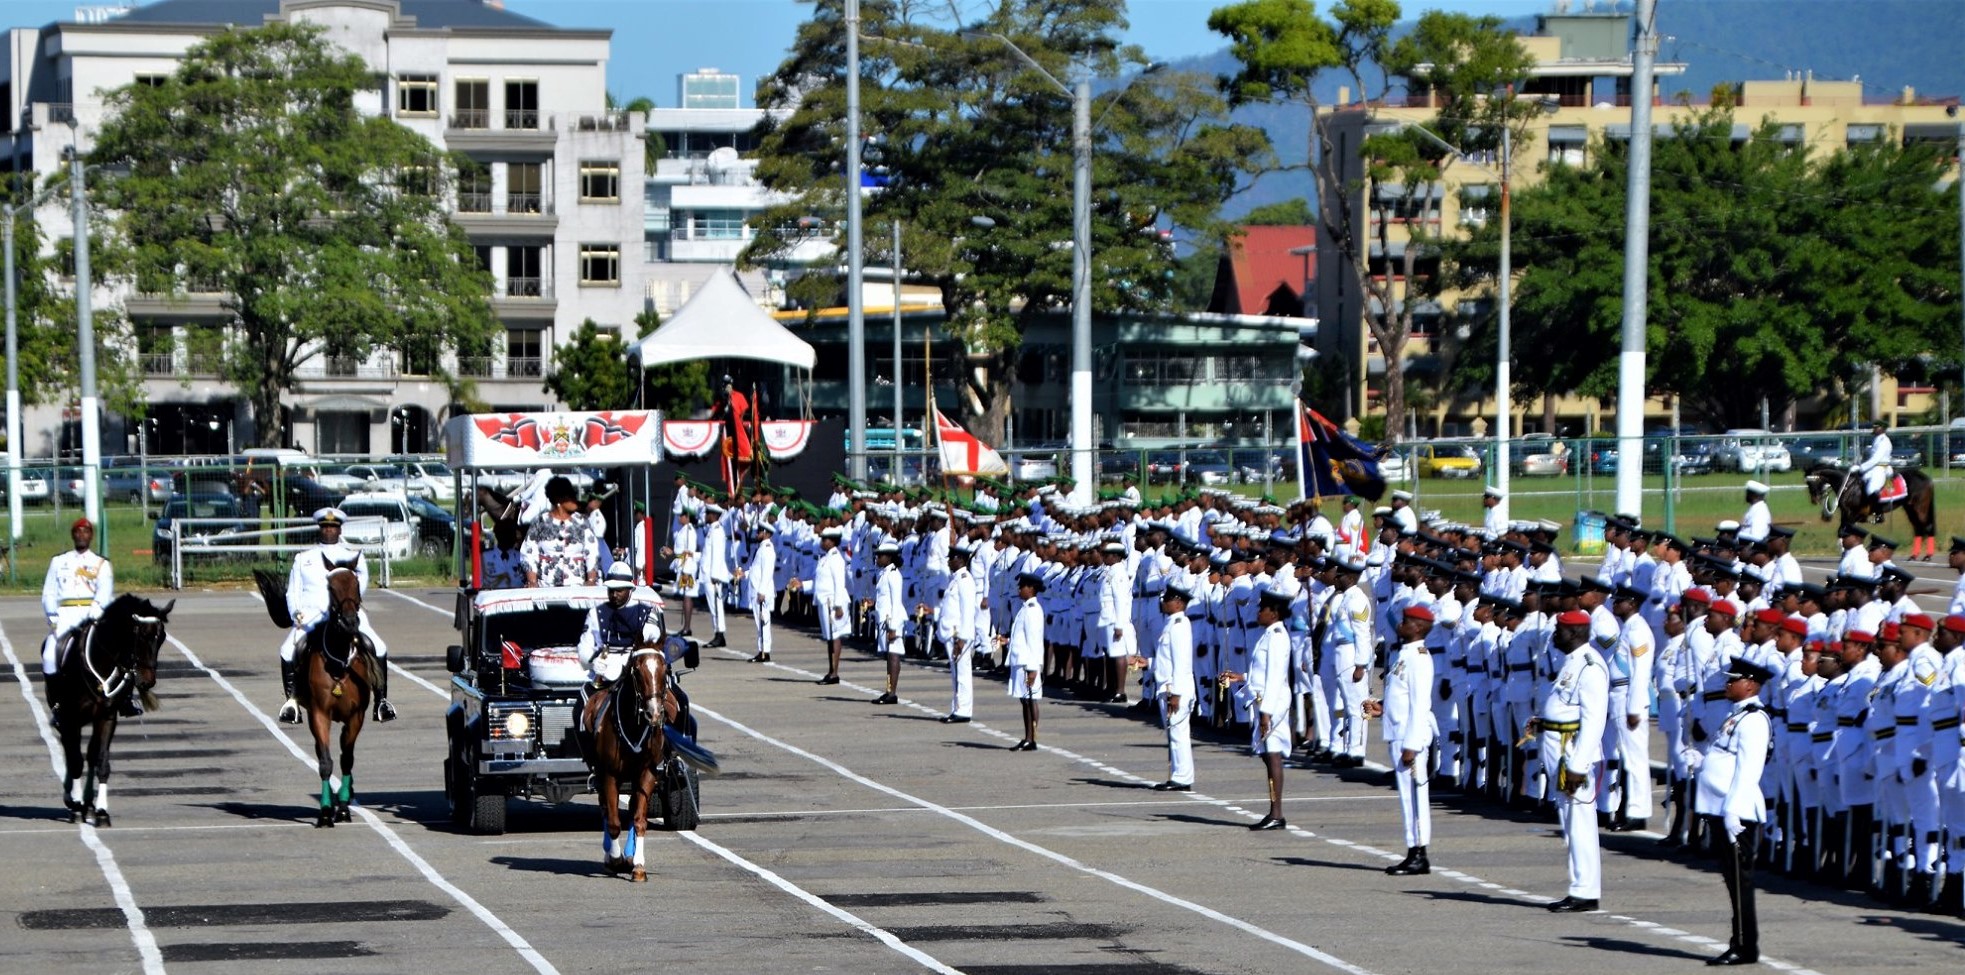 Minister of National Security: No Independence Day Parade This Year.